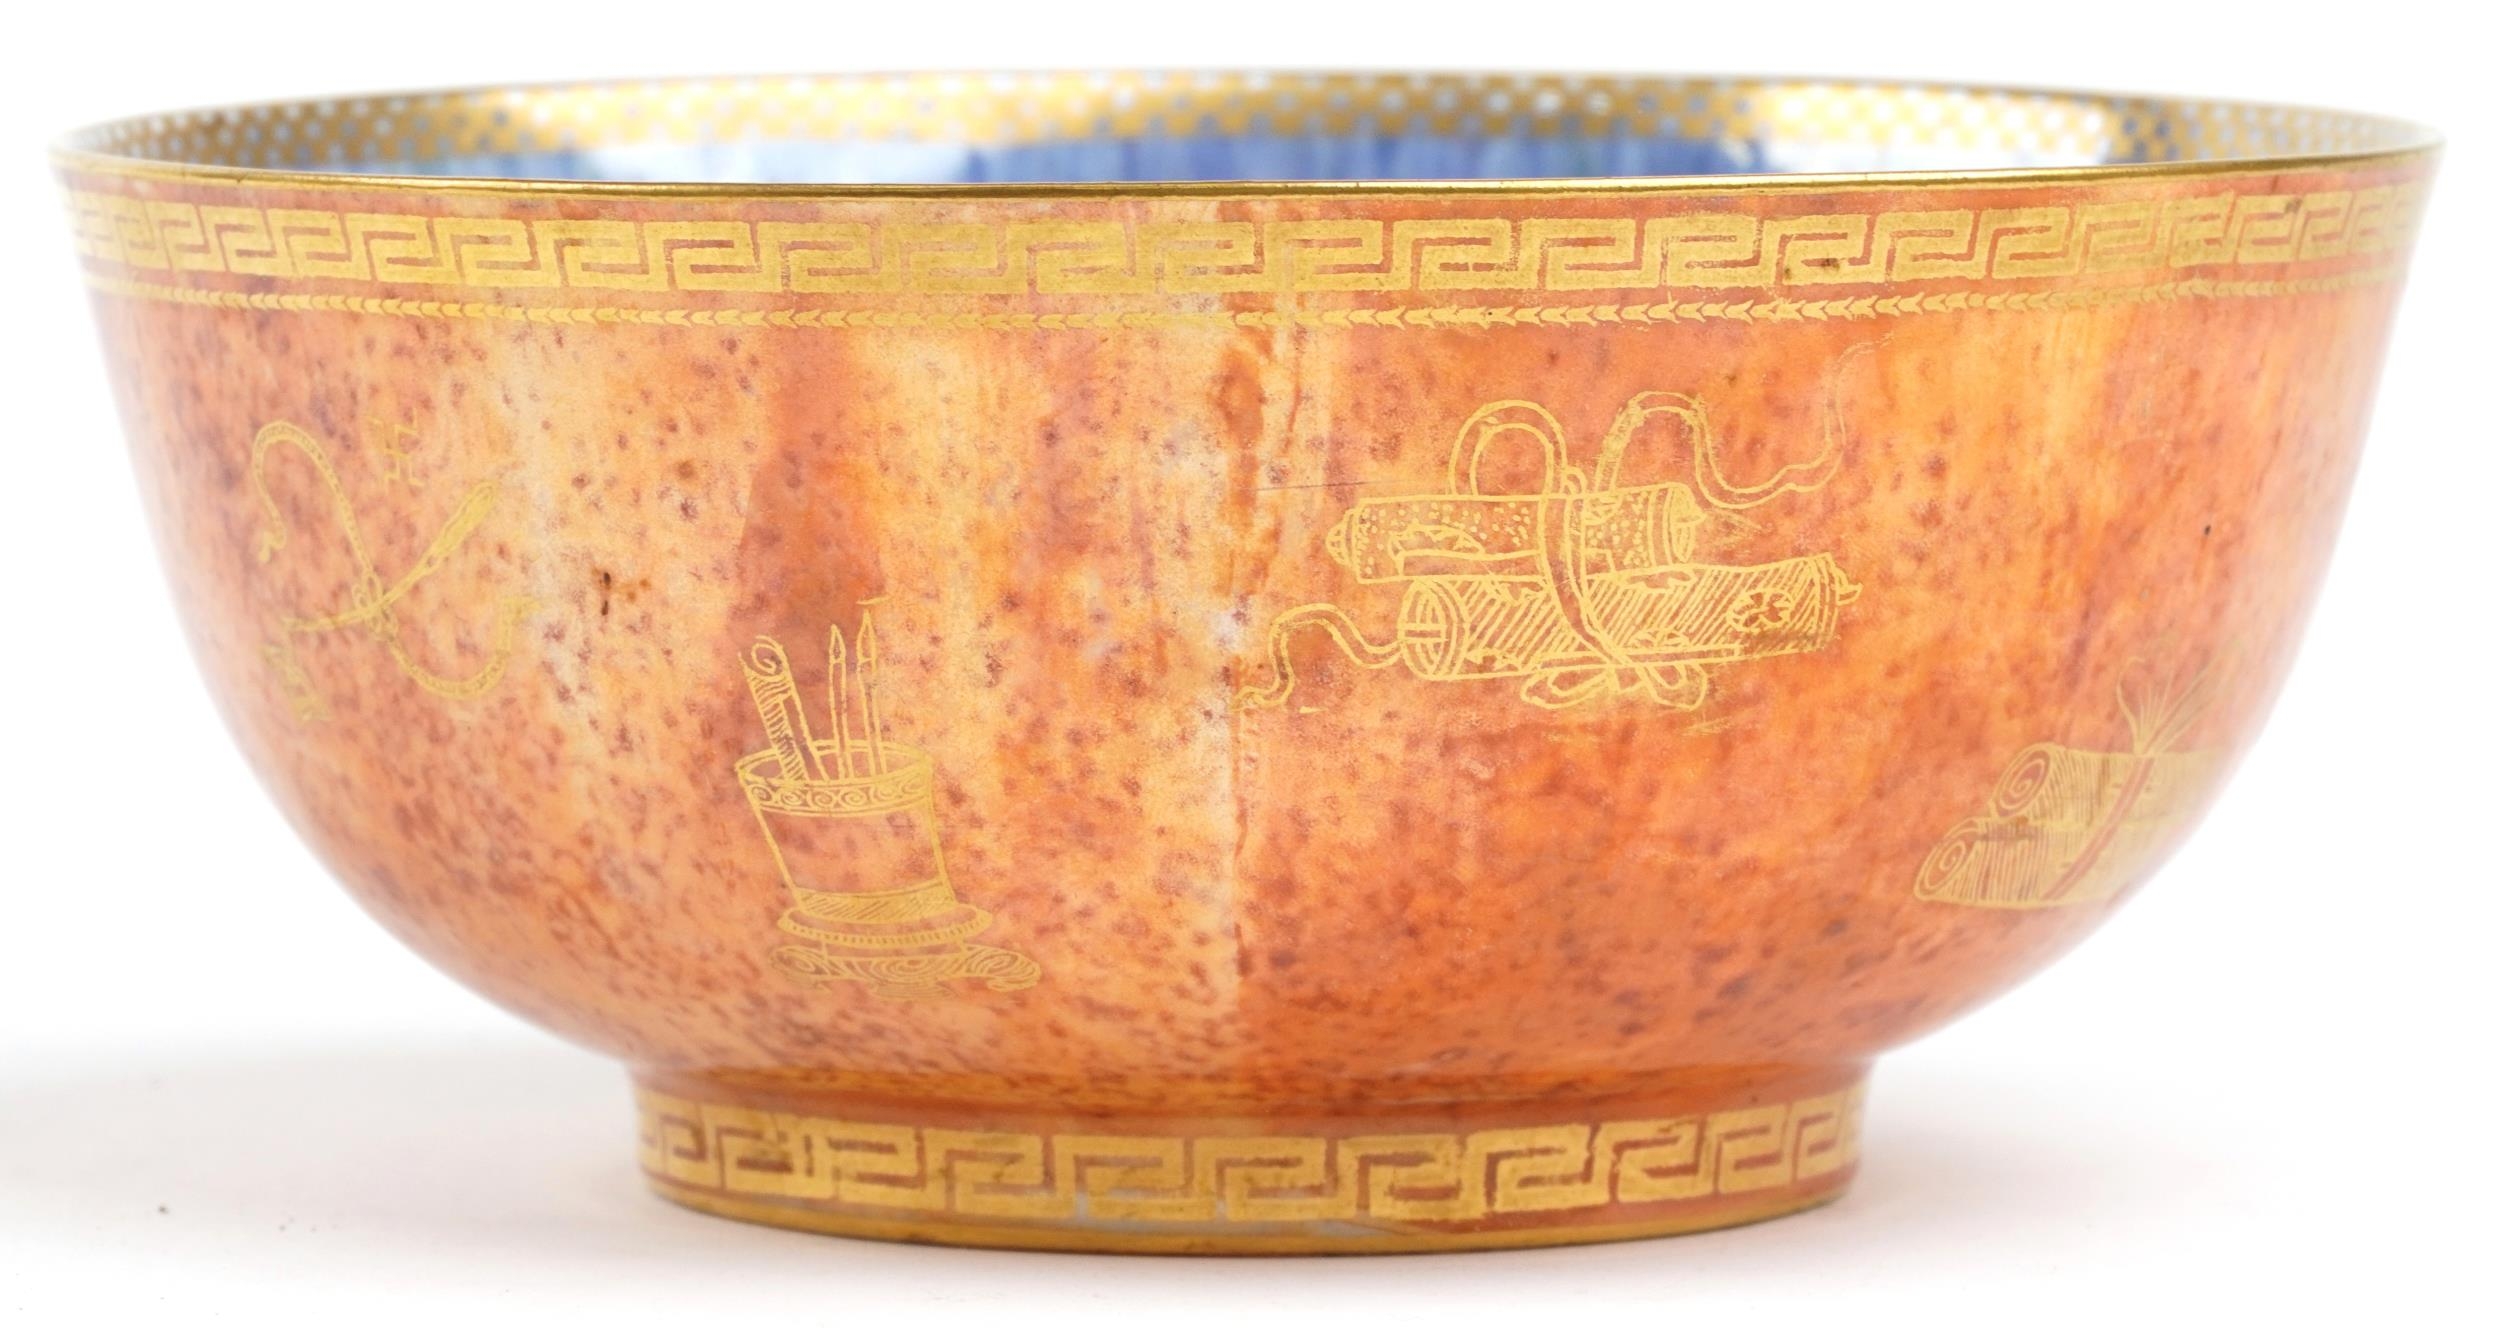 Wedgwood orange and blue ground Fairyland lustre bowl gilded with dragons chasing the flaming - Image 4 of 7